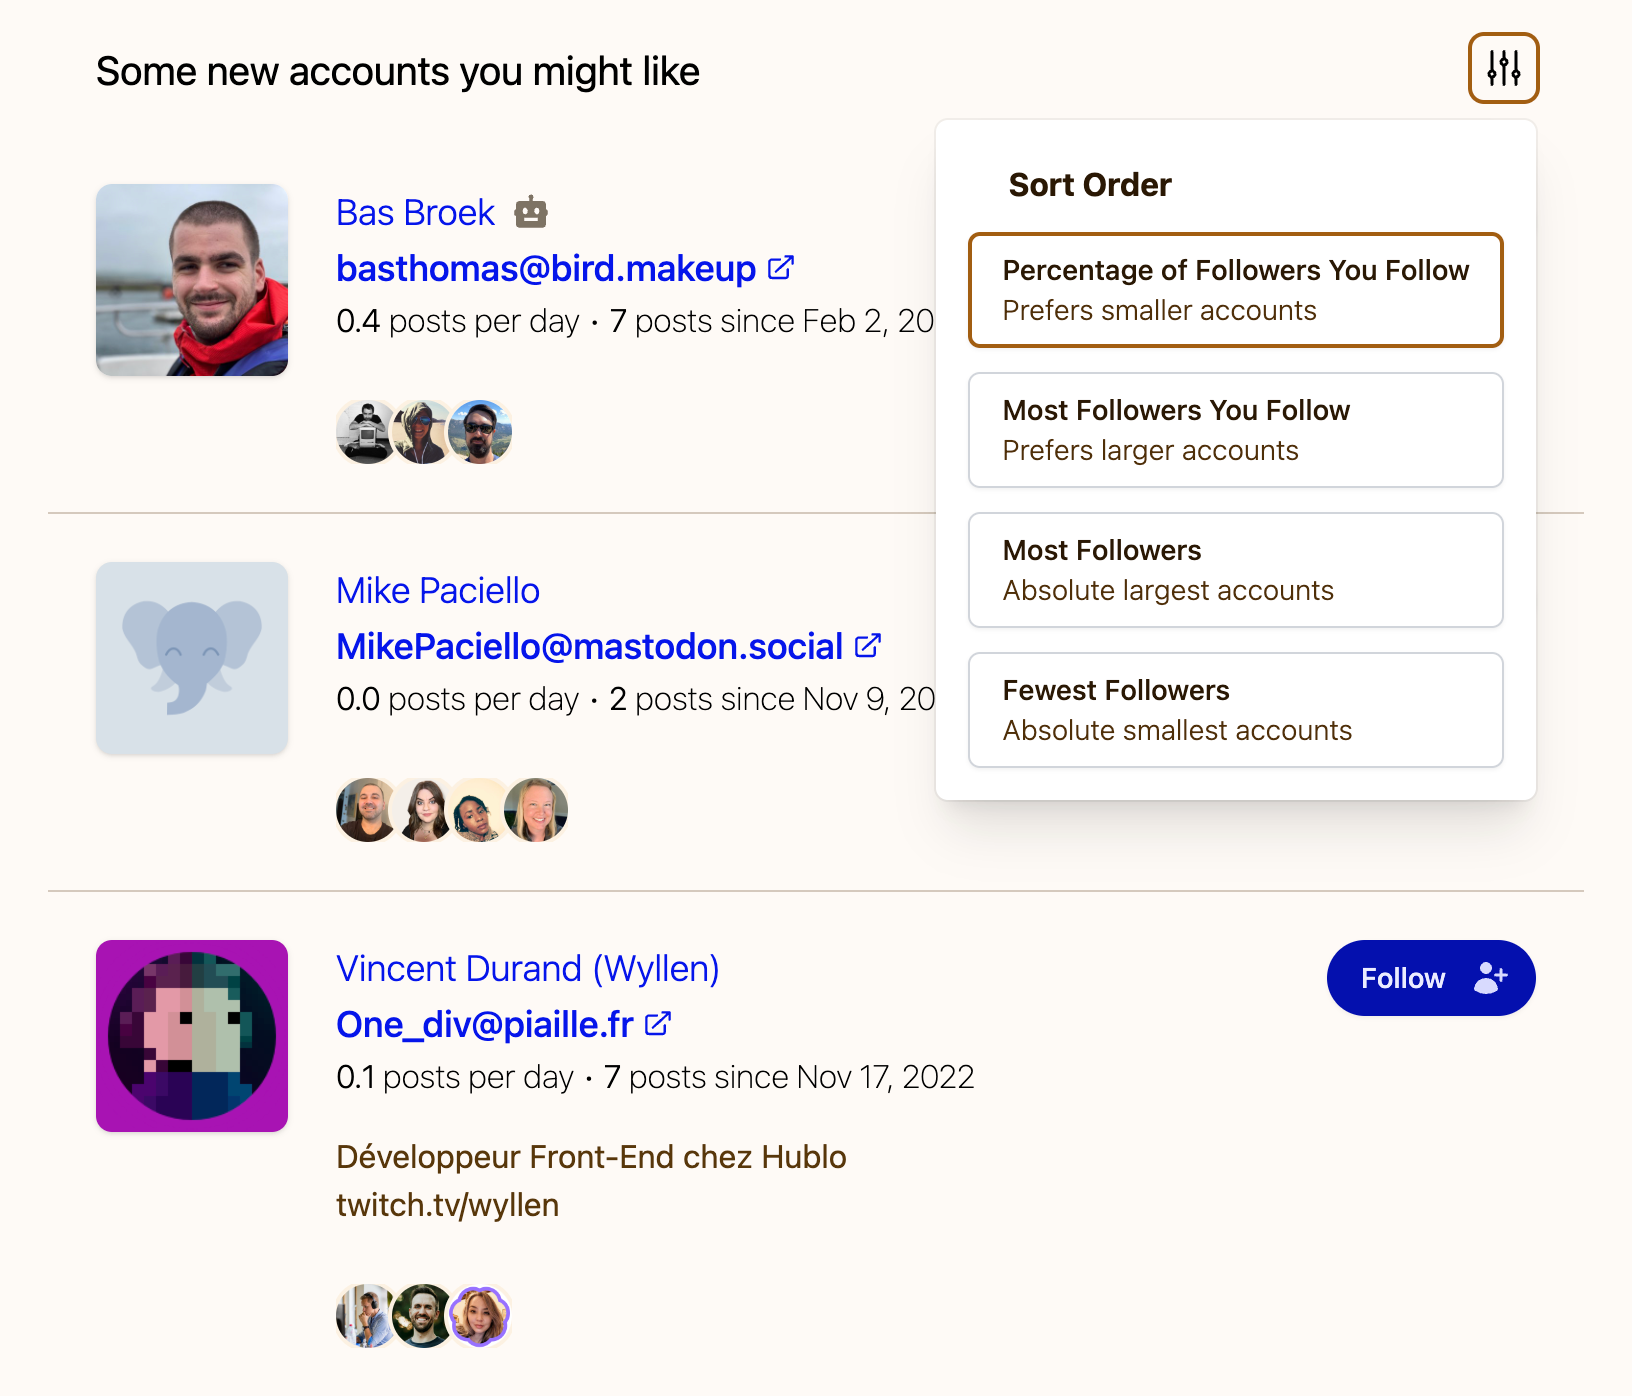 A list of accounts with the title, 'Some new accounts you might like'. Three accounts are listed, including an avatar, their name, their Mastodon instance account, their posting frequency and count, their profile bio statement, avatars representing mutual followers, and follow buttons. The listed accounts are 'Bas Broek, basthomas@bird.makeup', 'Mike Paciello, MikePaciello@mastodon.social', and 'Vincent Durand (Wyllen), One_div@piaille.fr'. A preferences disclosure menu in an open state is also present, listing sort order options. The options are, 'Percentage of Followers You Follow', 'Most Followers You Follow', 'Most Followers', and 'Fewest Followers'. Cropped screenshot.